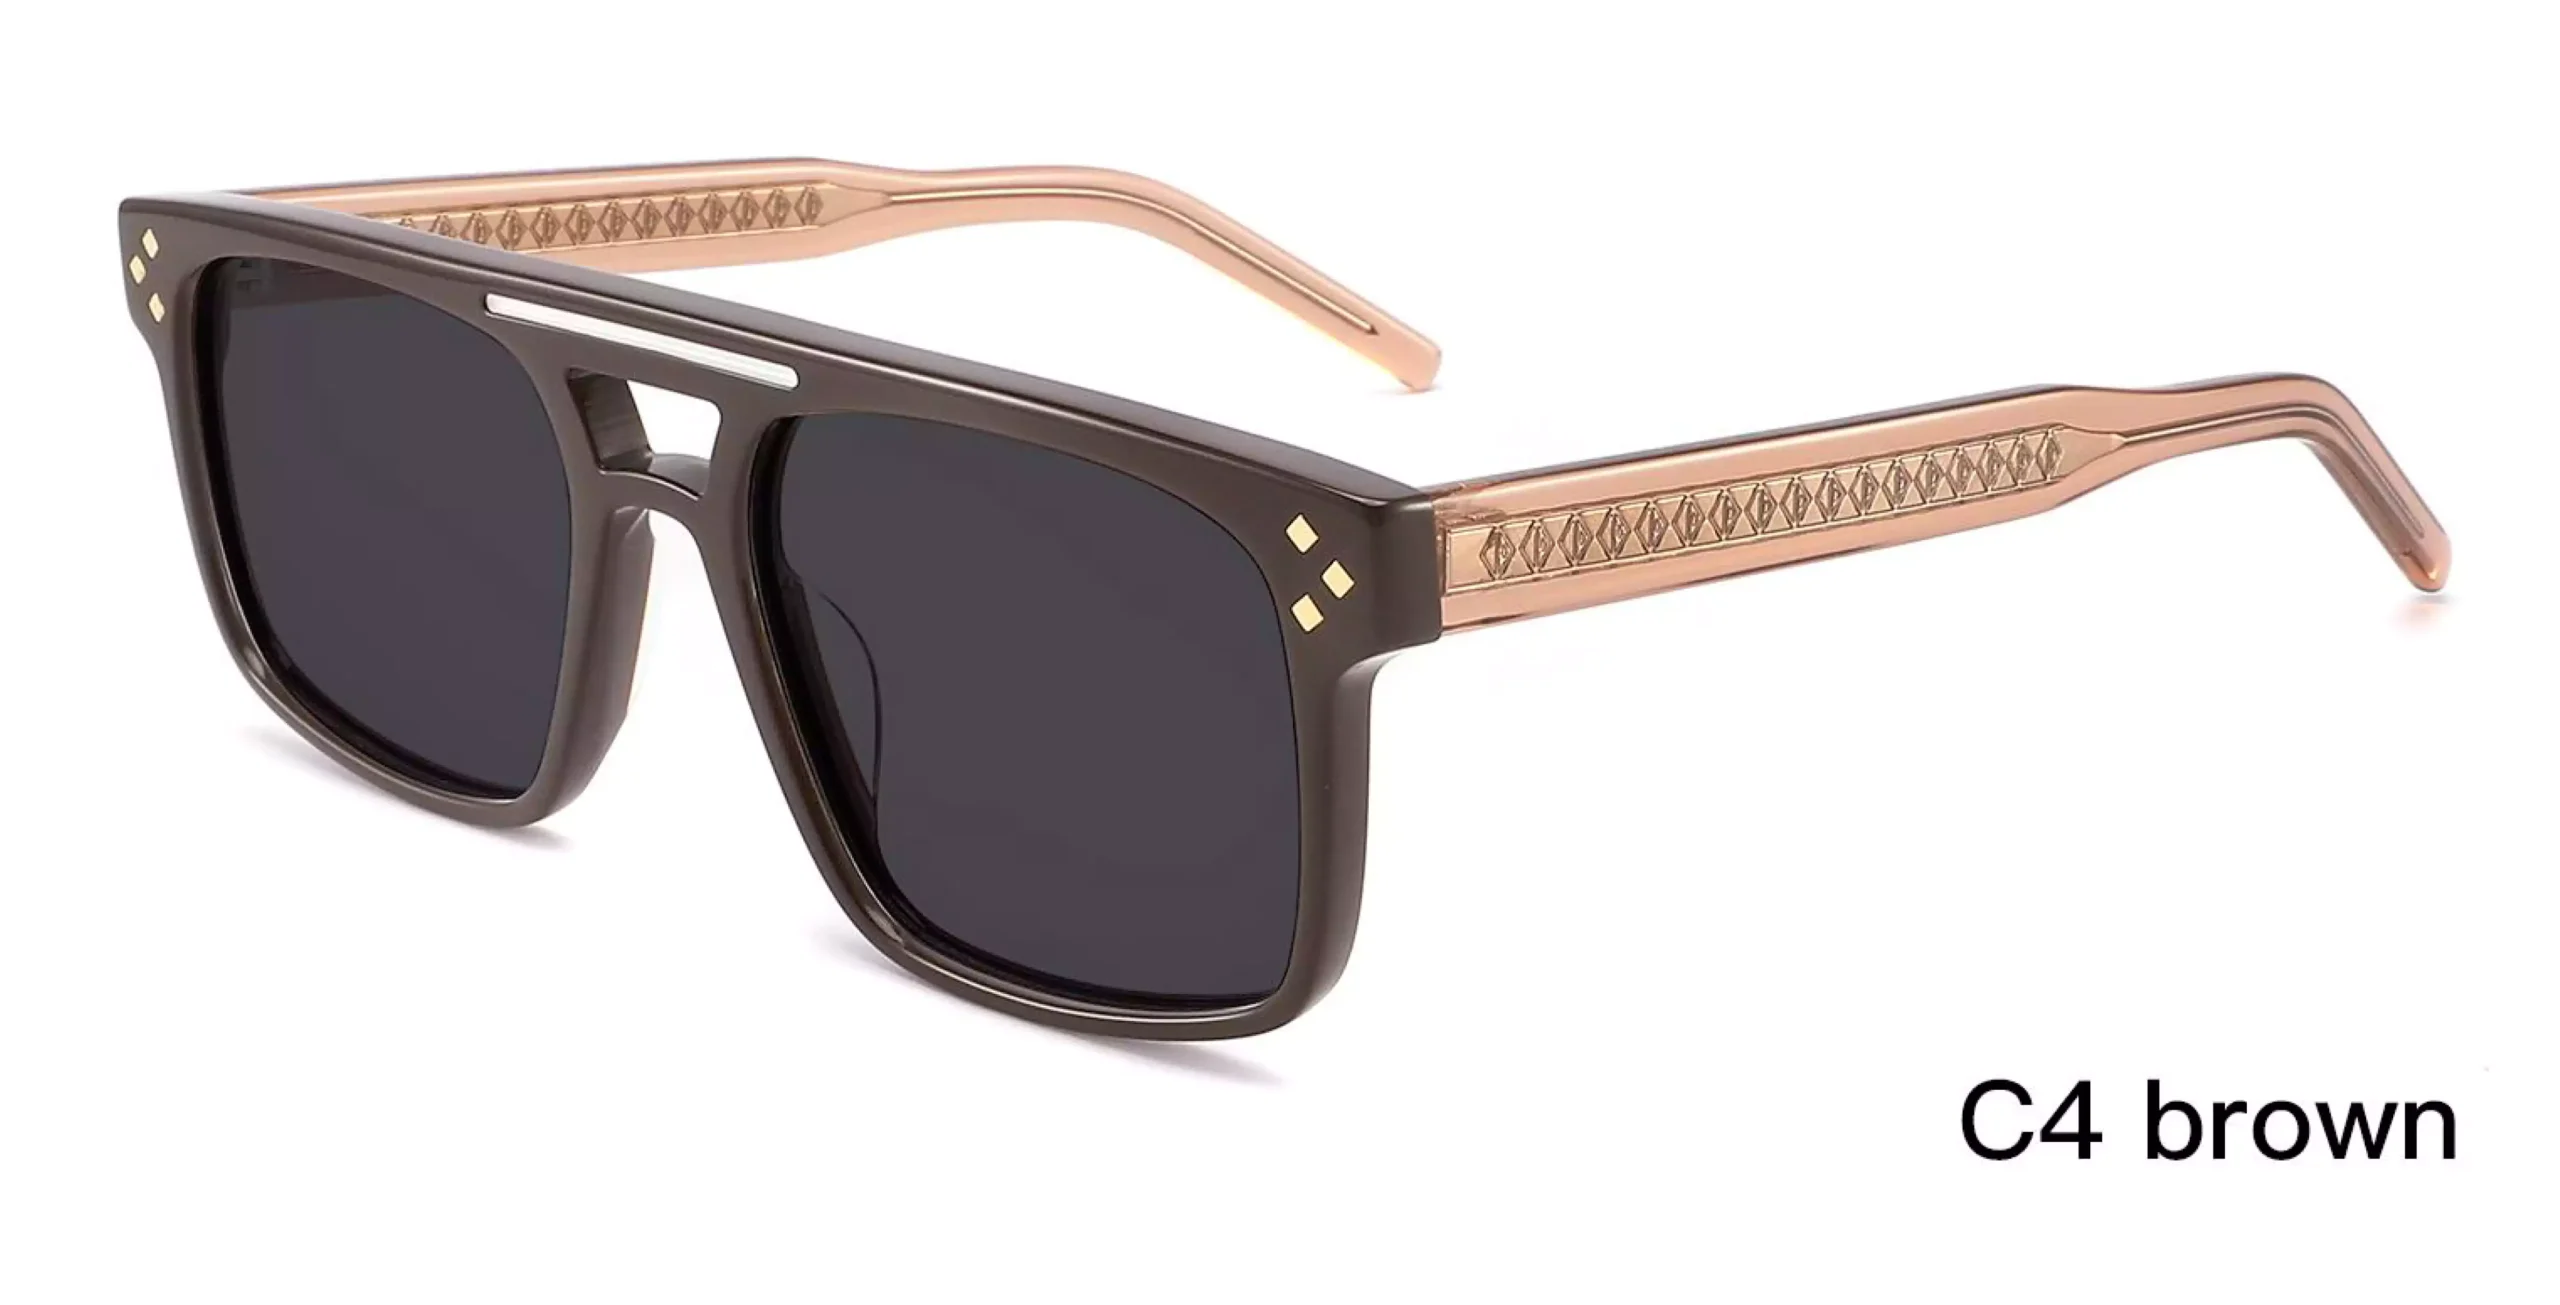 Fashion Sunglasses Wholesale Suppliers, Brown, transparent pink temples, rivets, metal inlay, laser engraved wire cores,acetate, wide temples